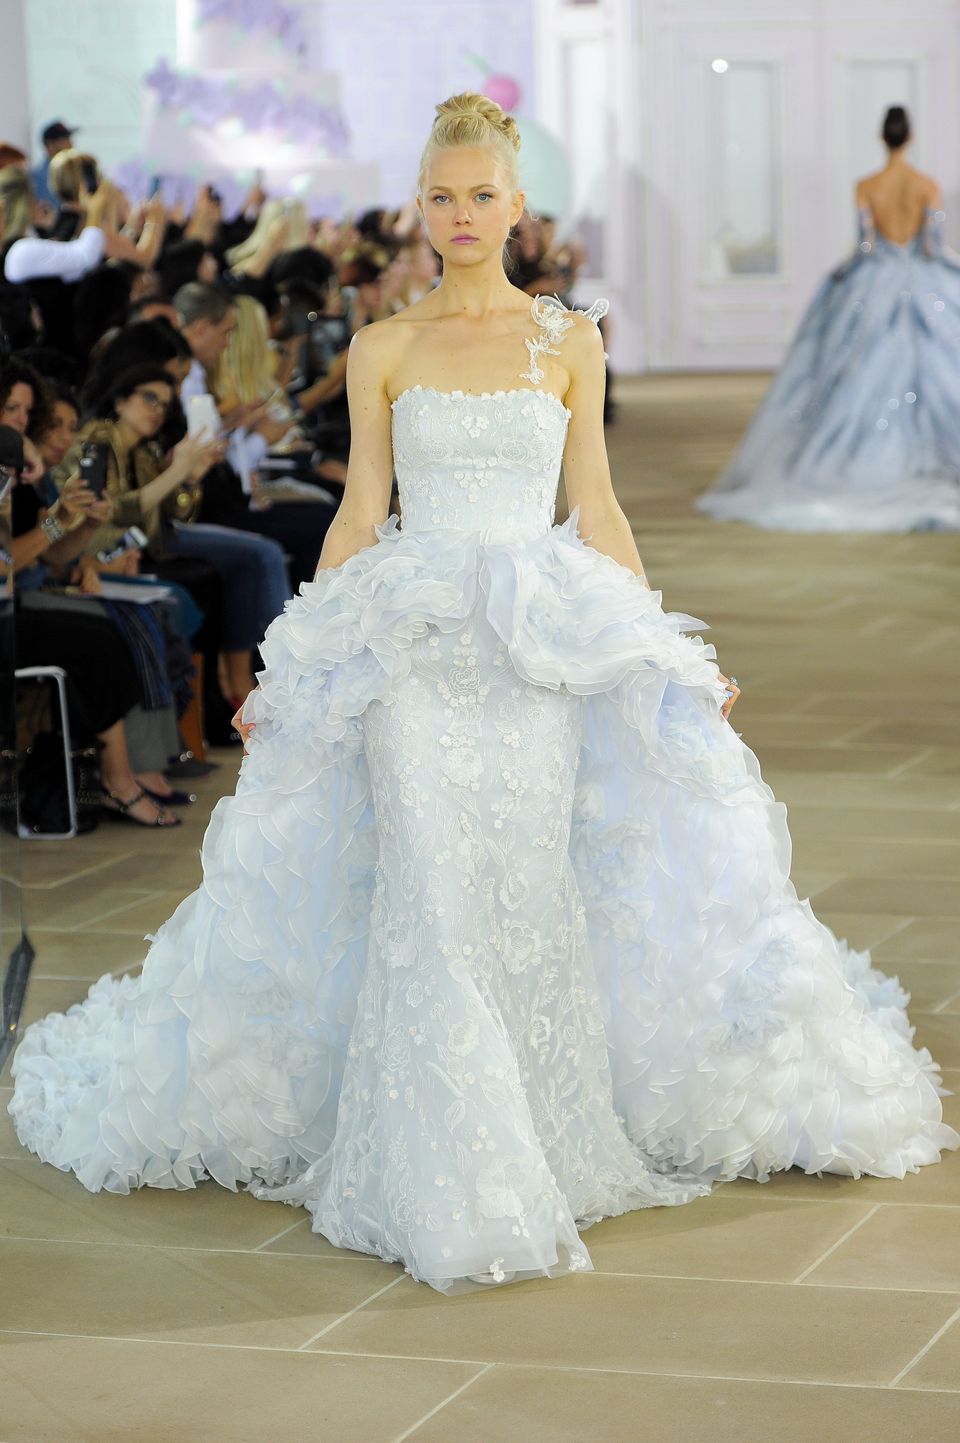 28 New Wedding Dresses That Will Make You Re-Think The Classic White ...